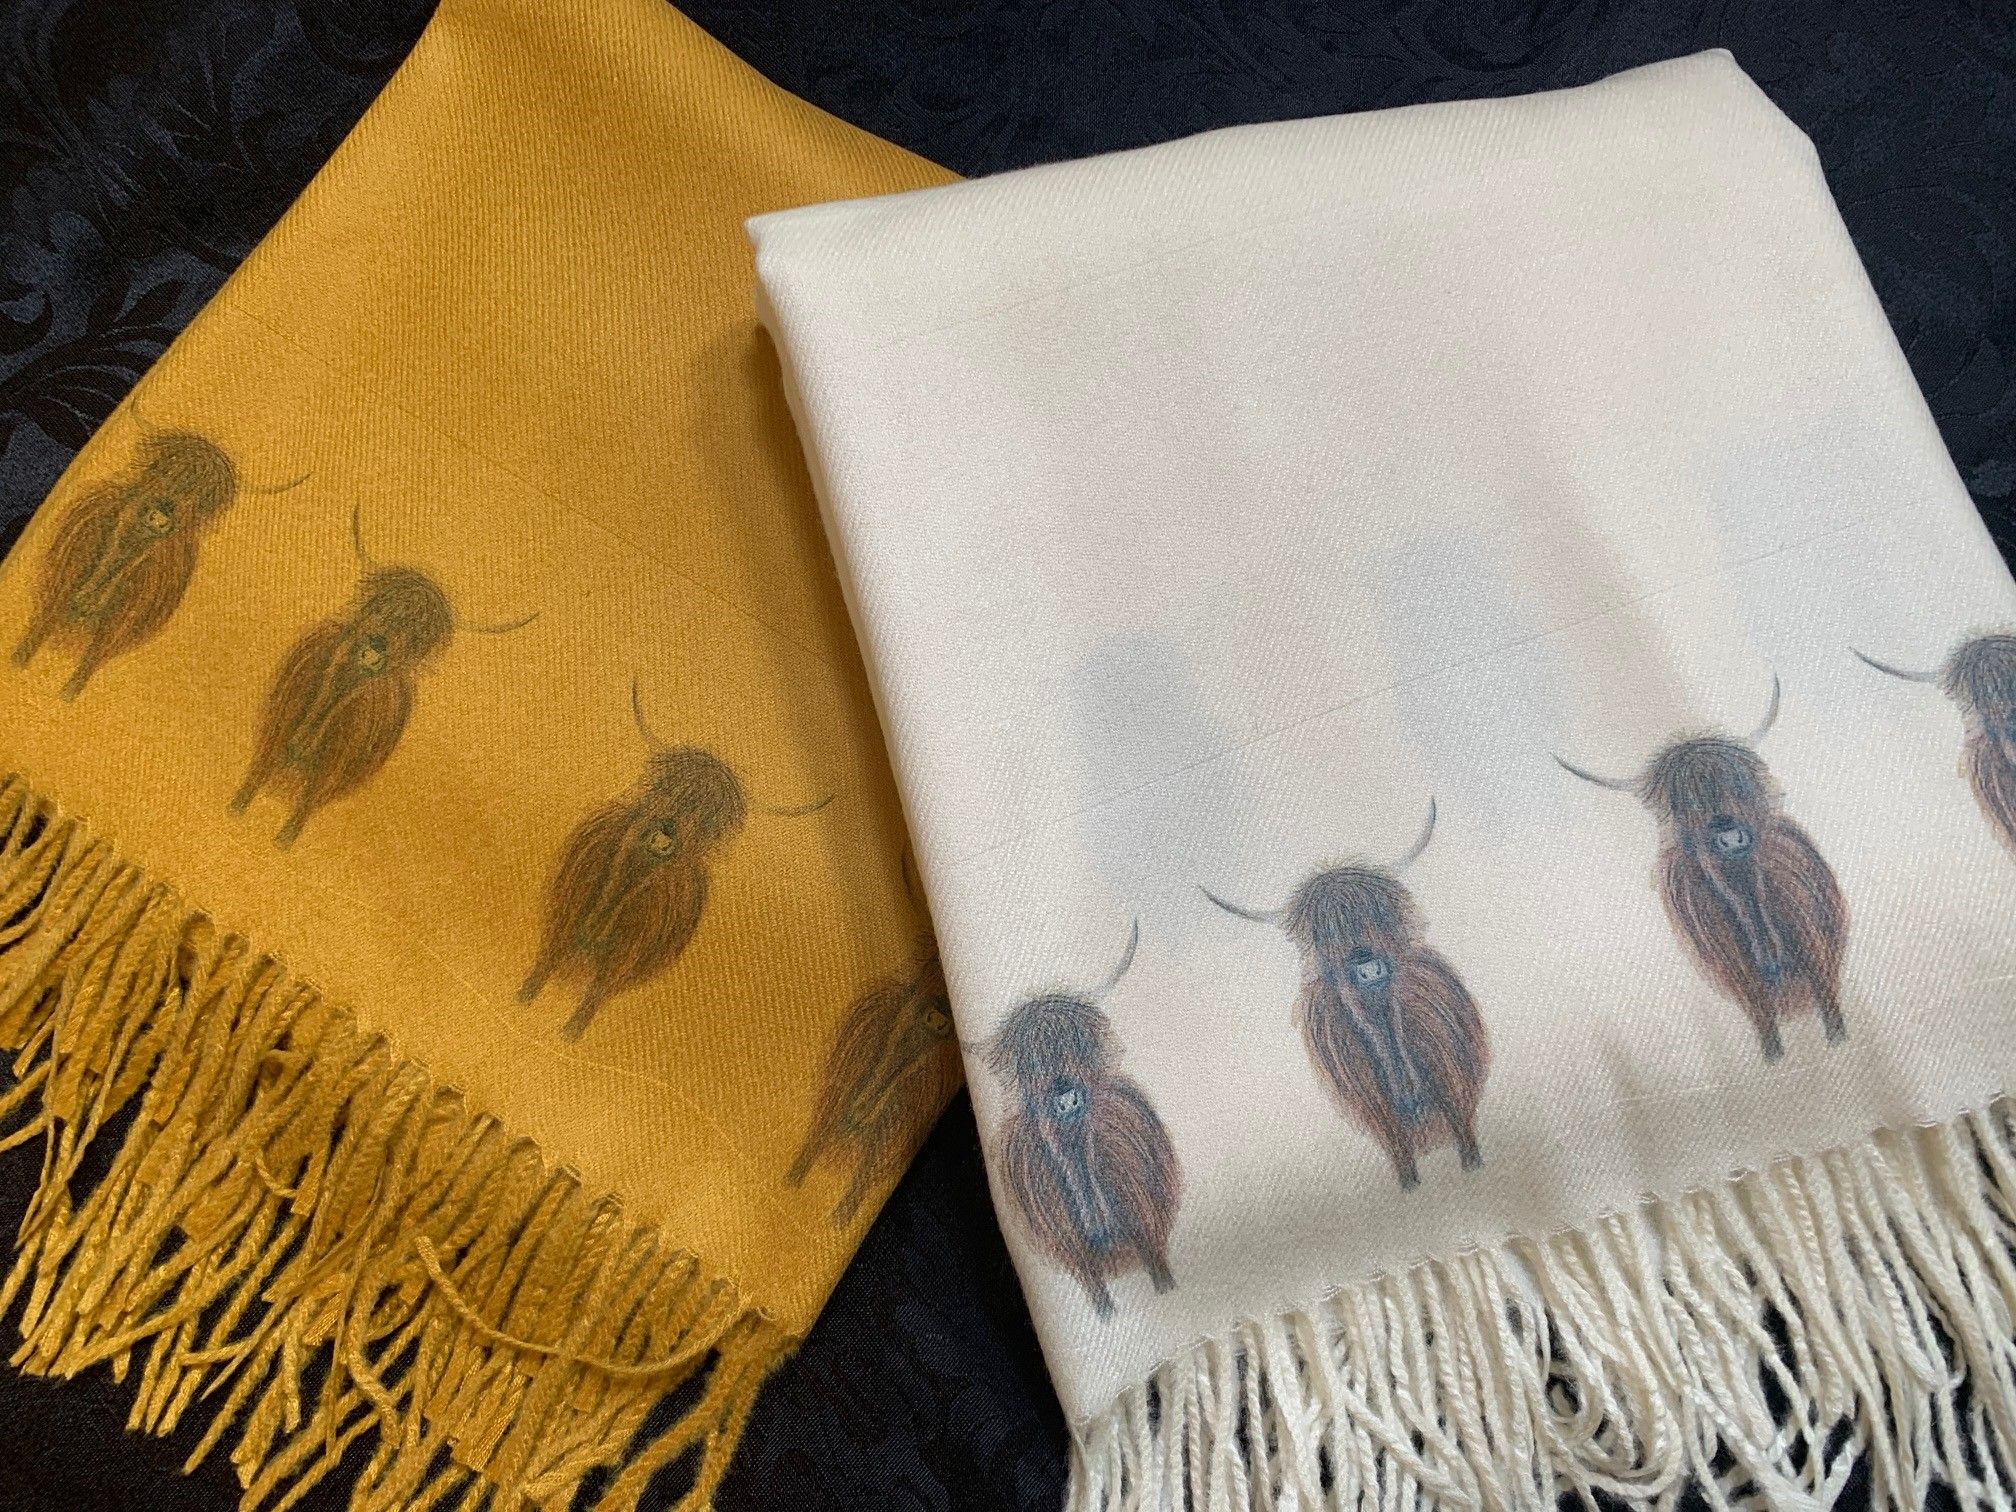 Highland Cows Handprinted on Luxurious Cashmere Blend Scarves